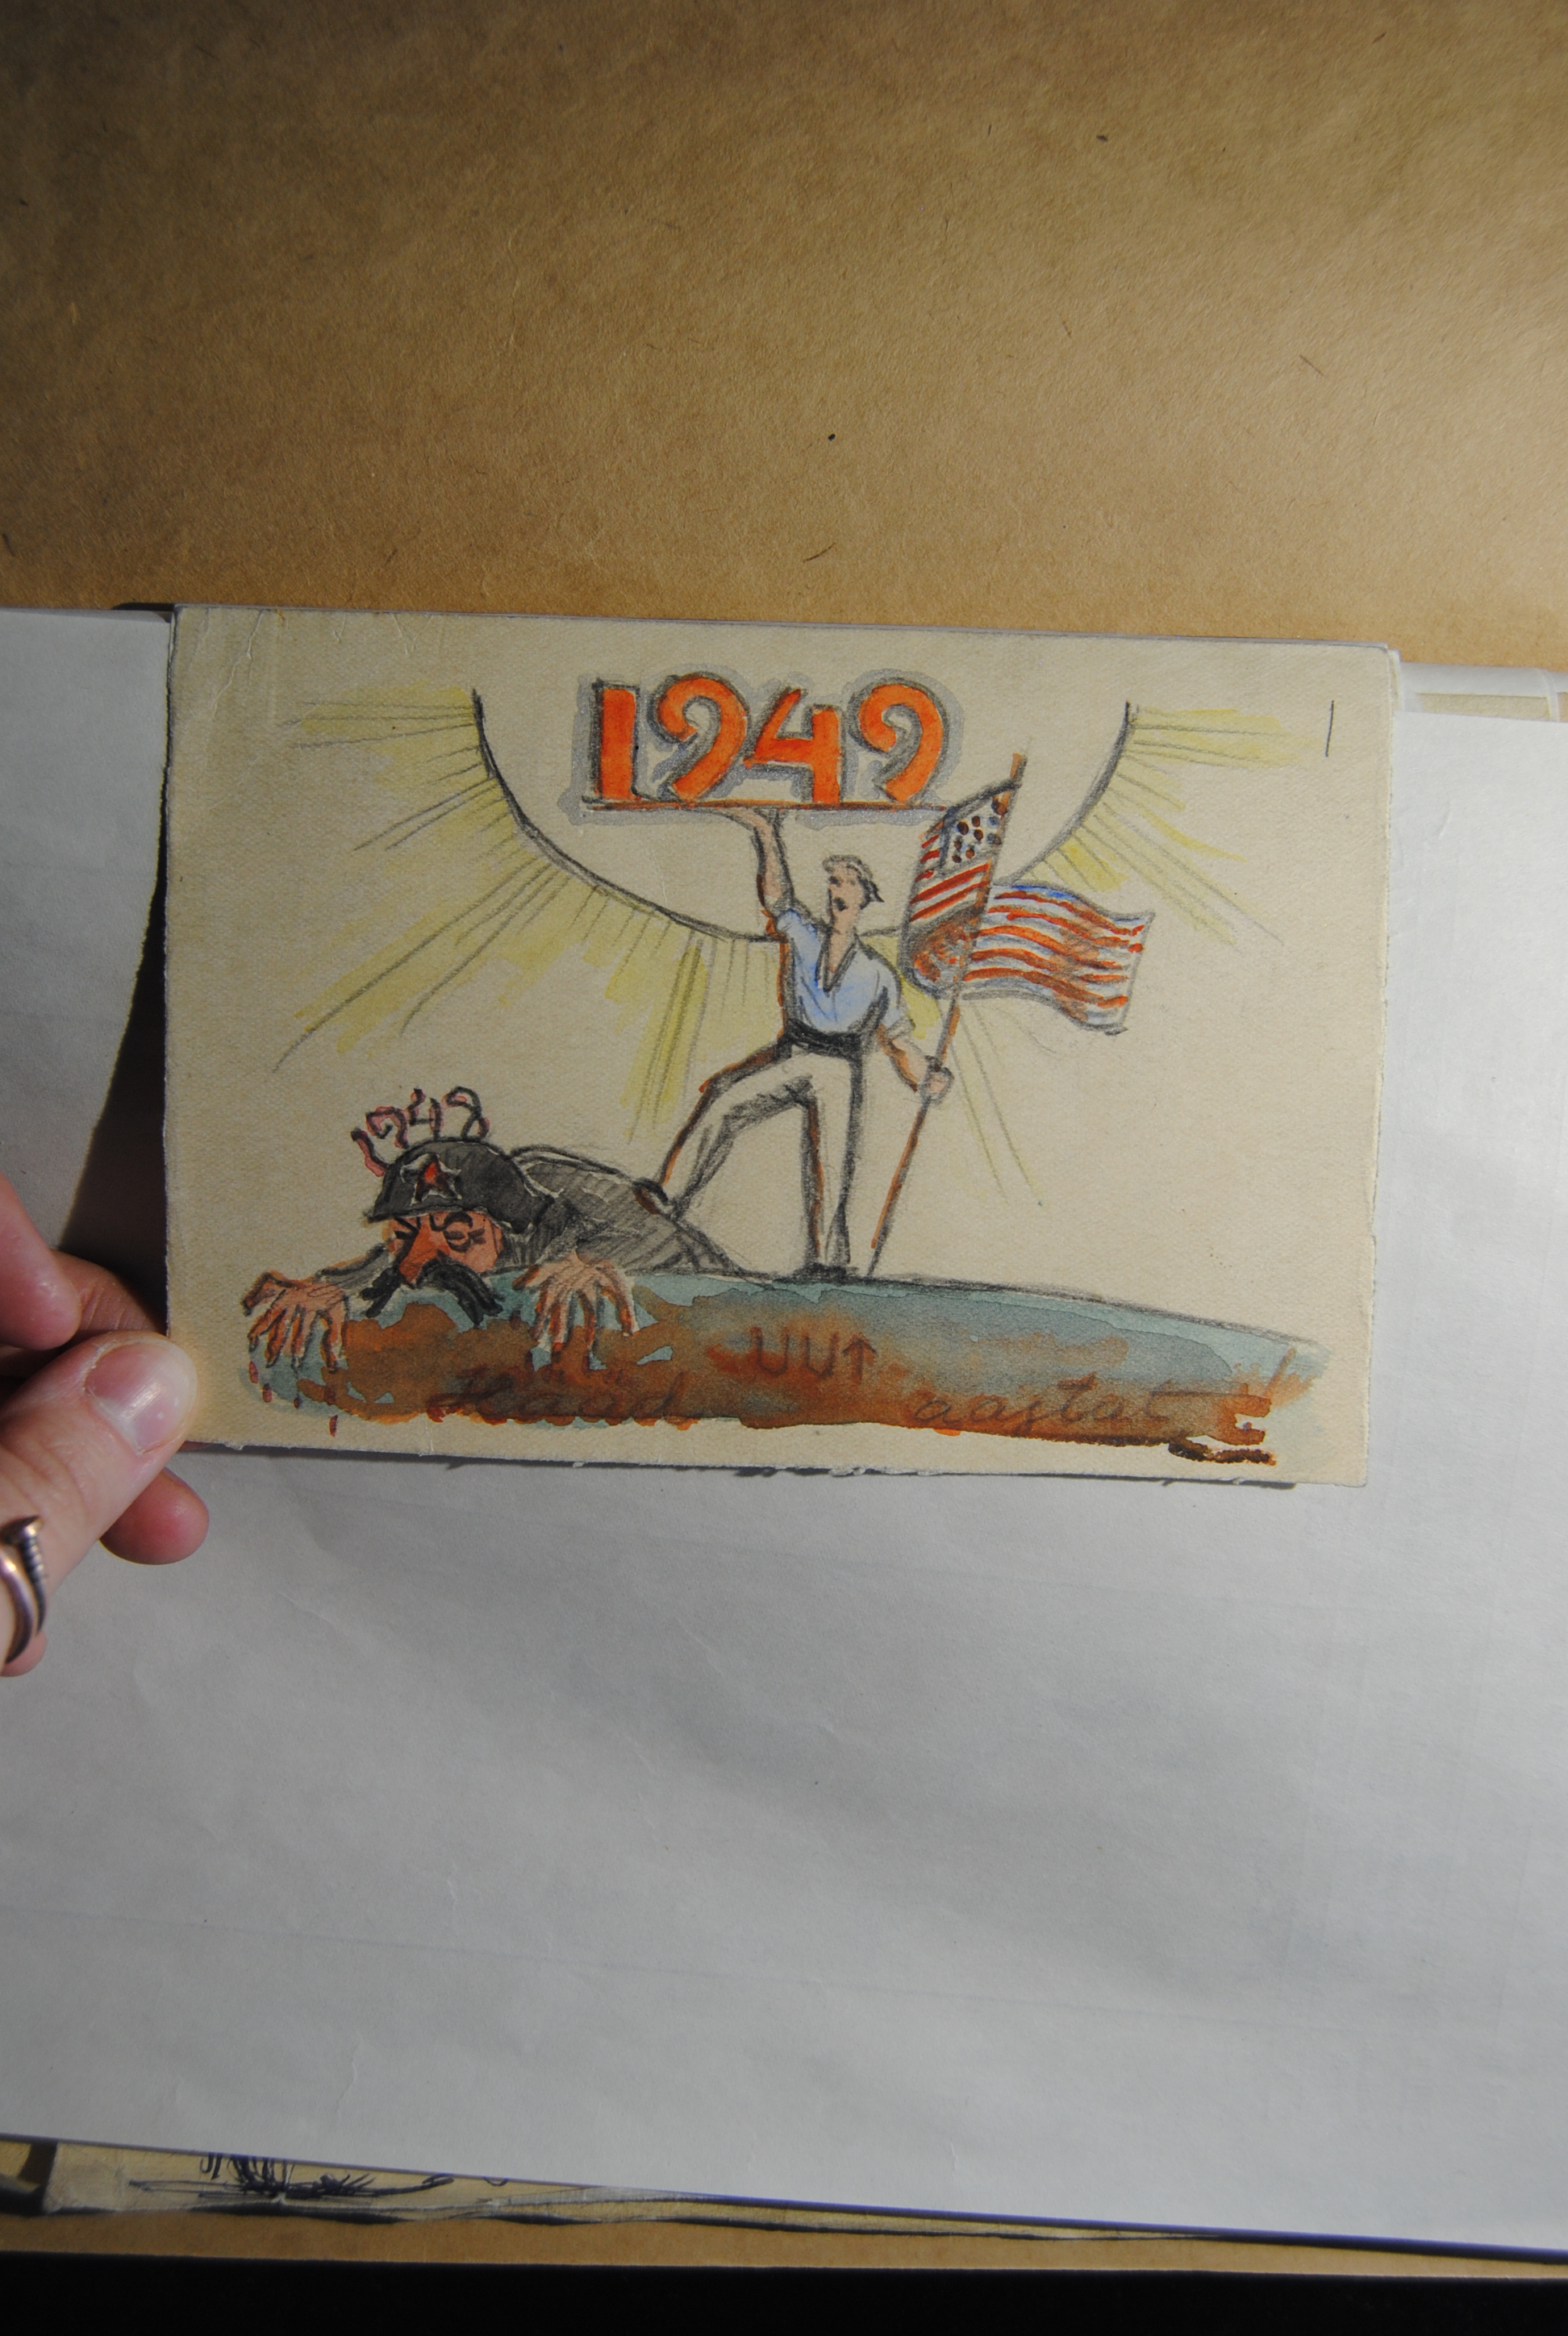 The new year postcard with a political message serves well as an example of drawings added to the case file as evidence materials. It was painted by Lembit Saarts in 1948/49.